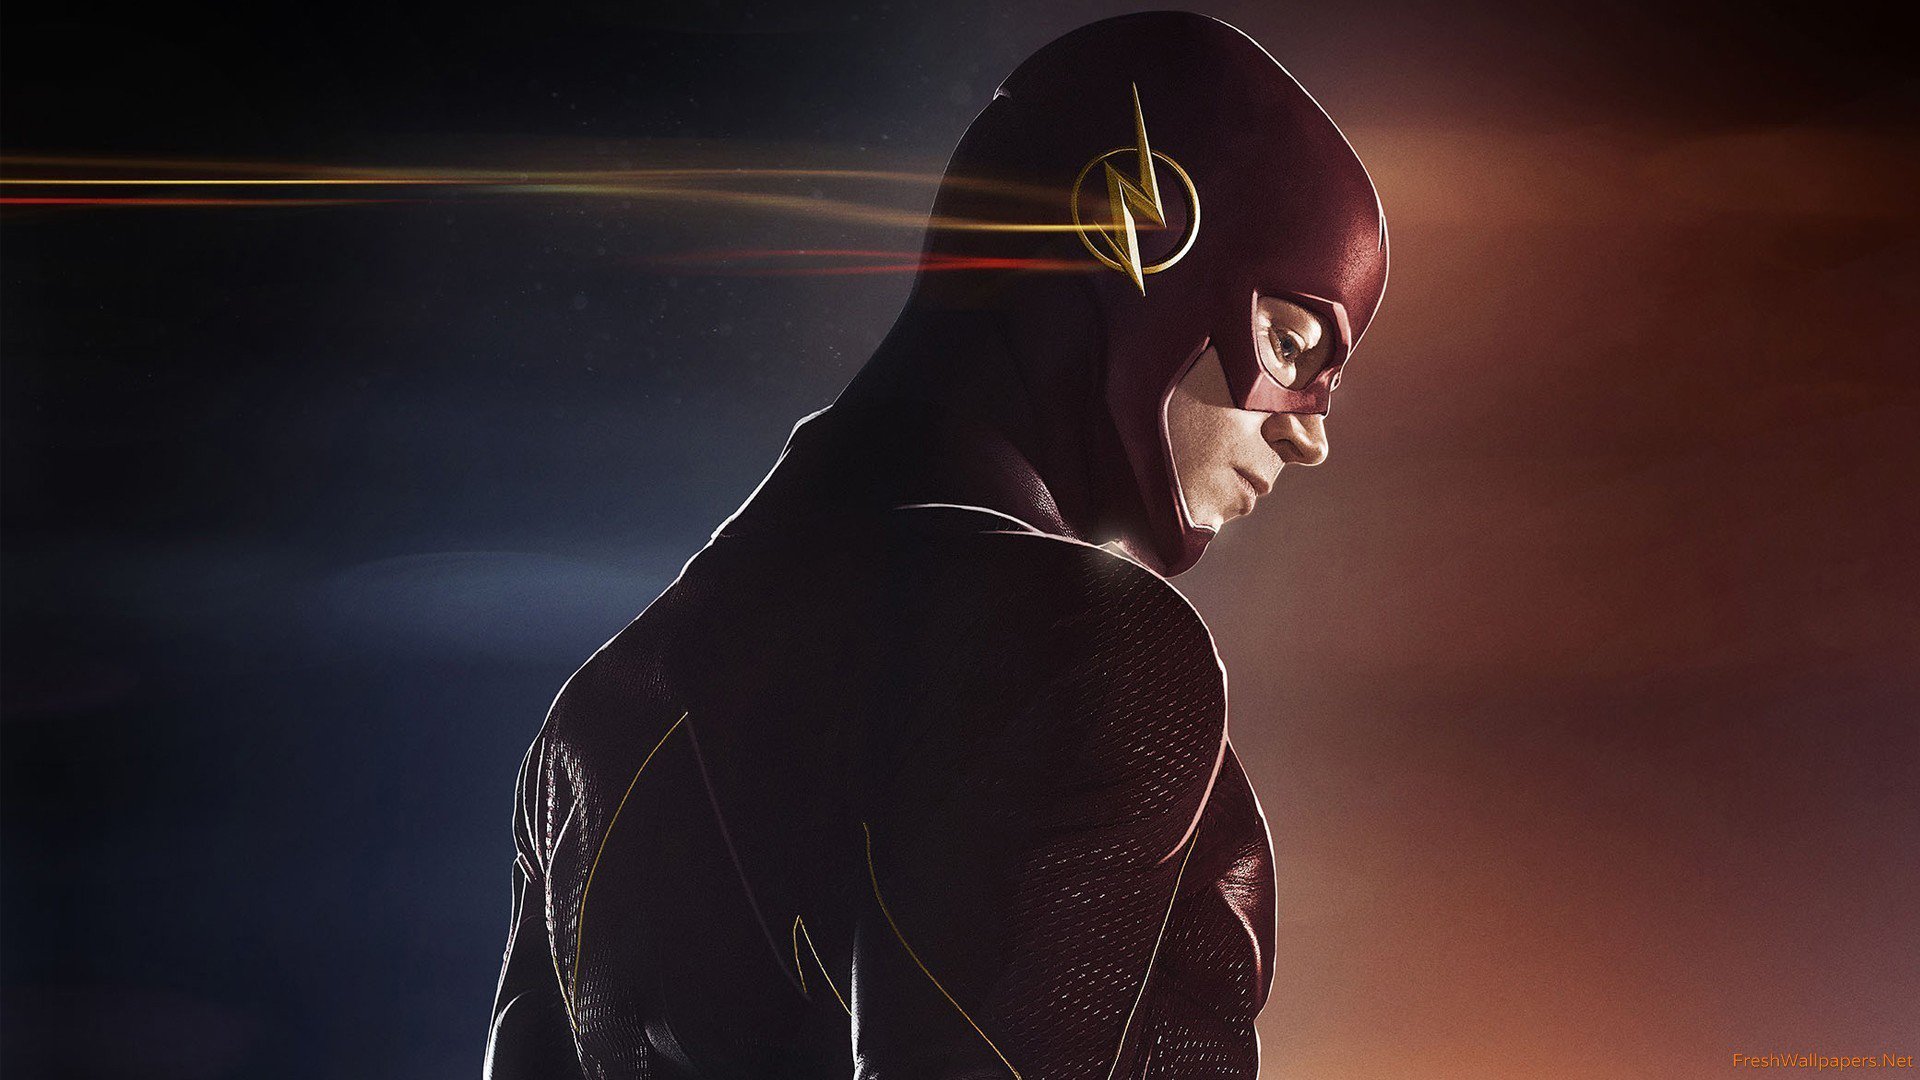 links for the flash s2e7